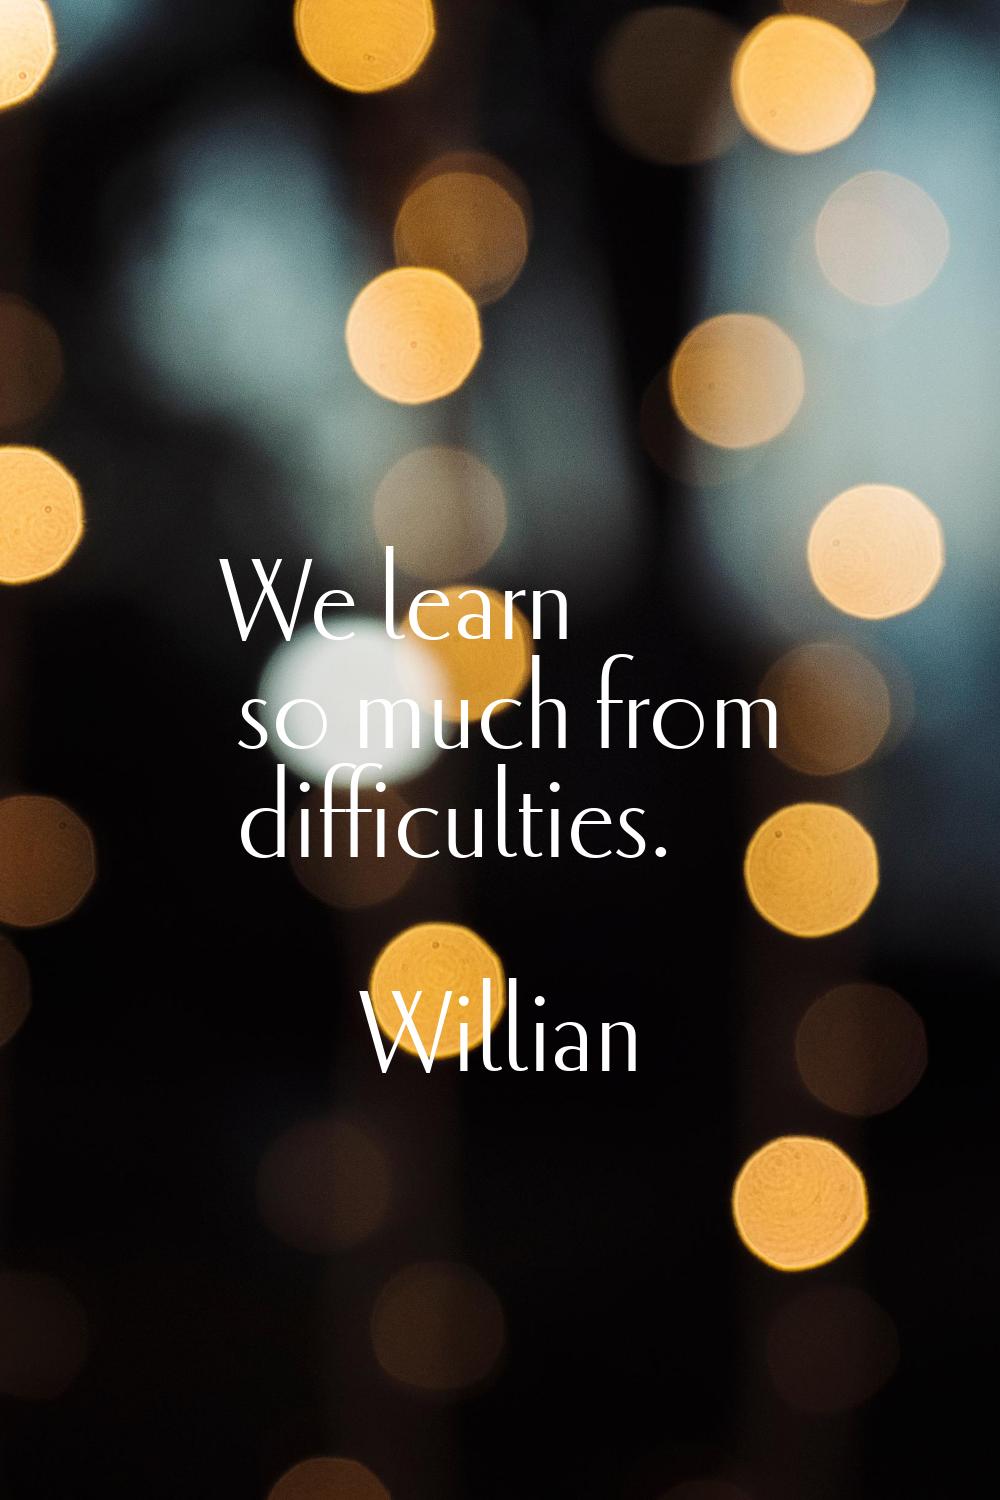 We learn so much from difficulties.